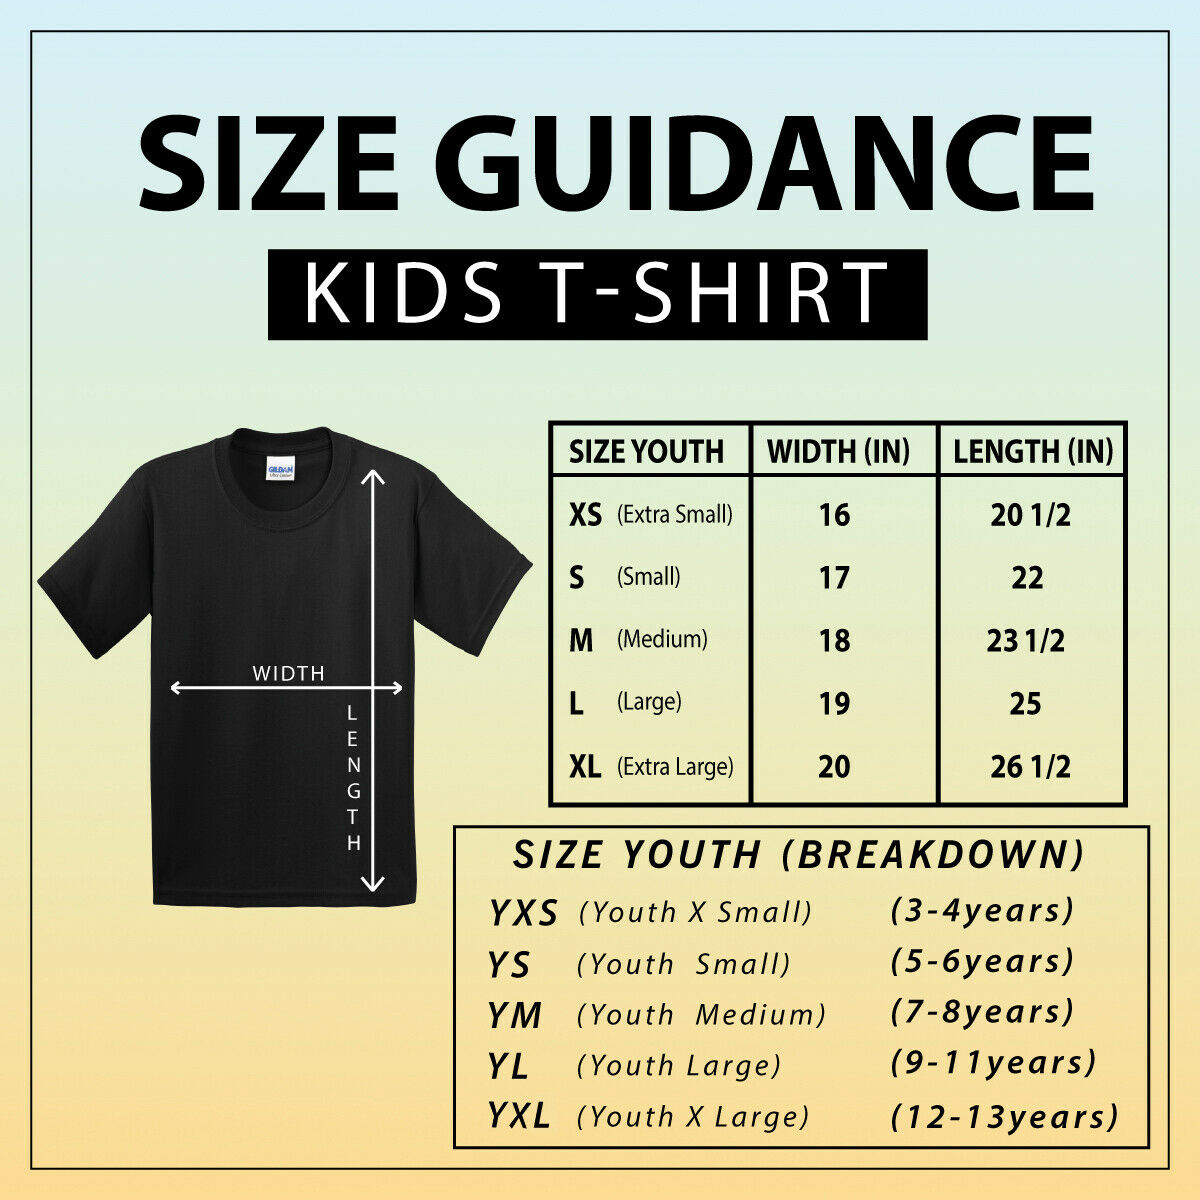 Personalized Custom Name Number Team Football Kids T-Shirt.